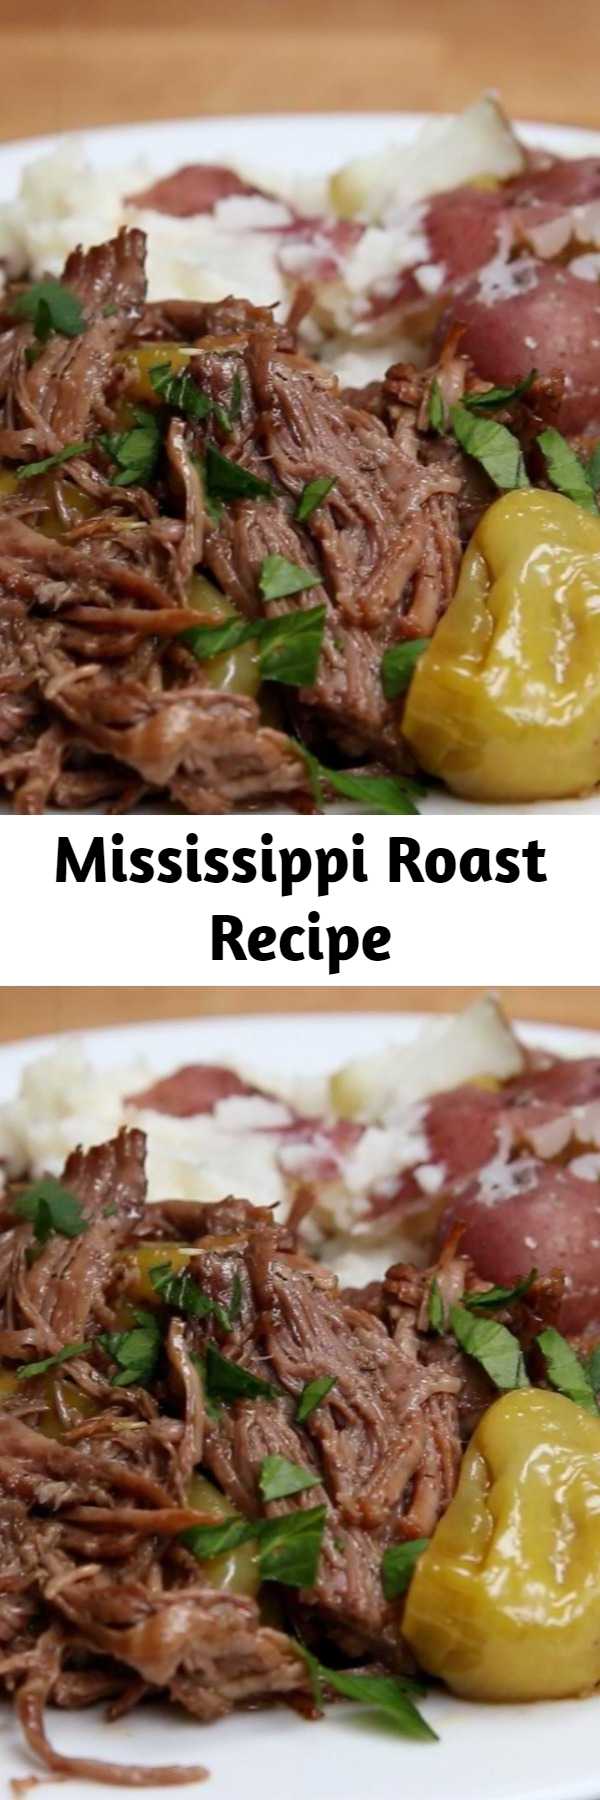 Mississippi Roast Recipe - The best roast you’ve ever had in your entire life. You need to make this ASAP! Simple ingredients, zero effort, 100% dinner & leftover satisfaction!